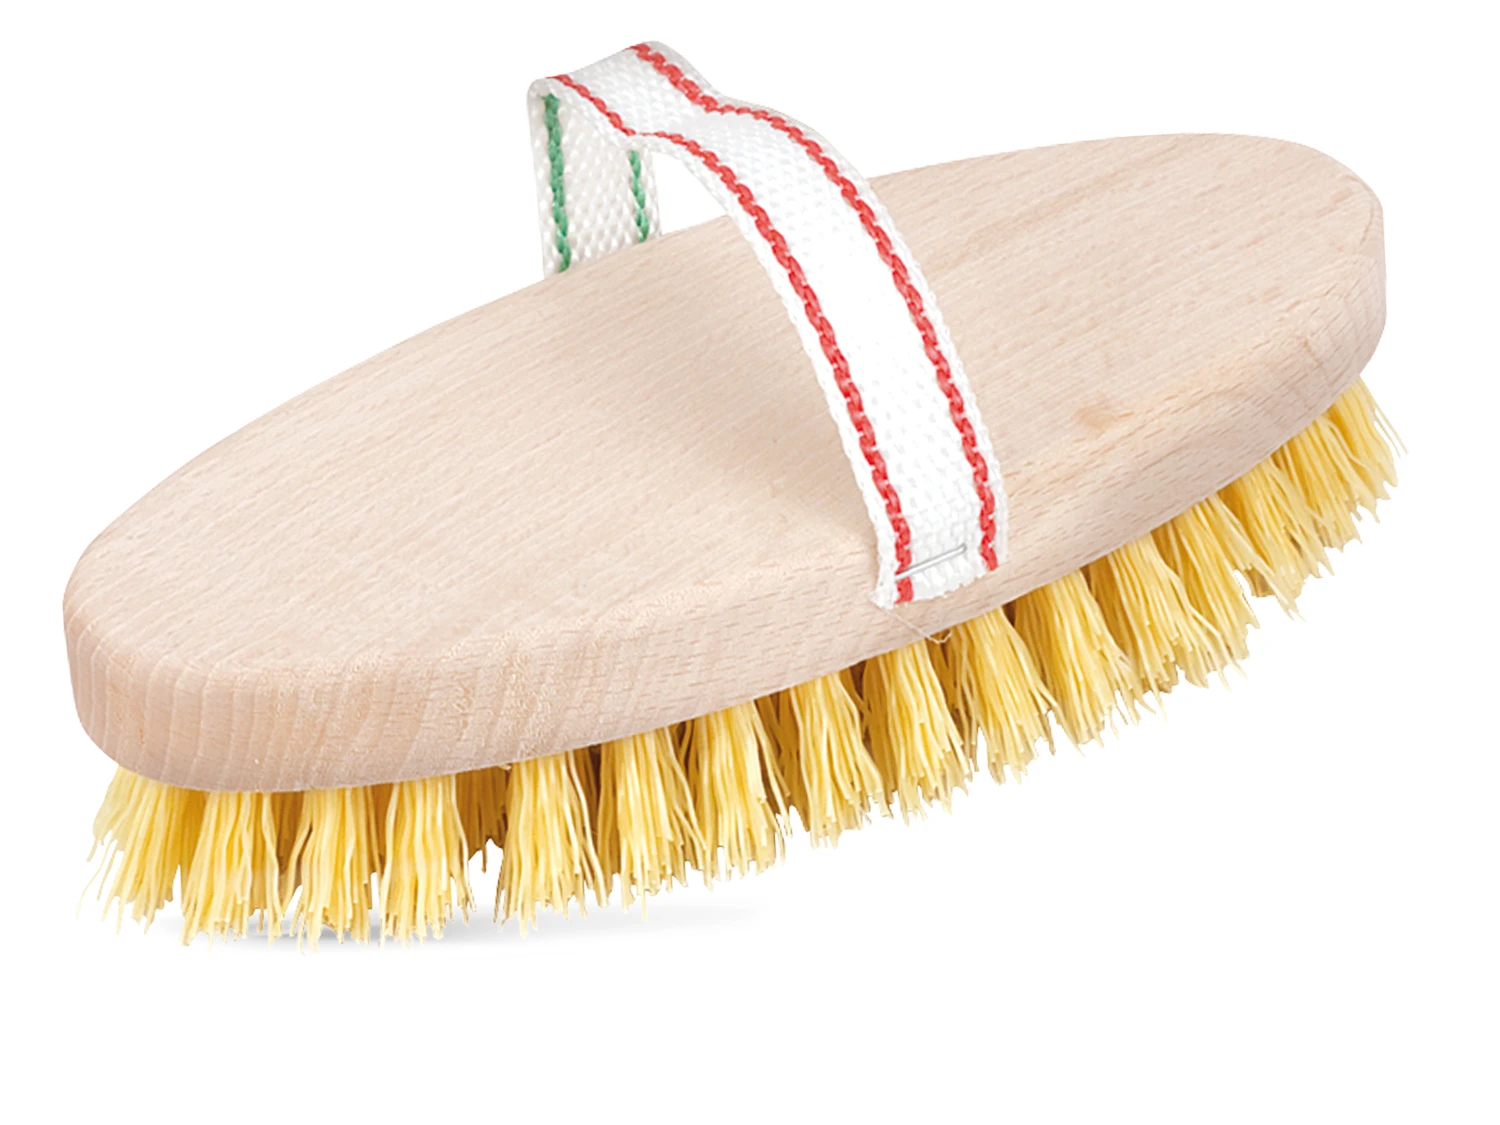 Z7753 – HORSE BRUSH SYNTHETIC ROOT